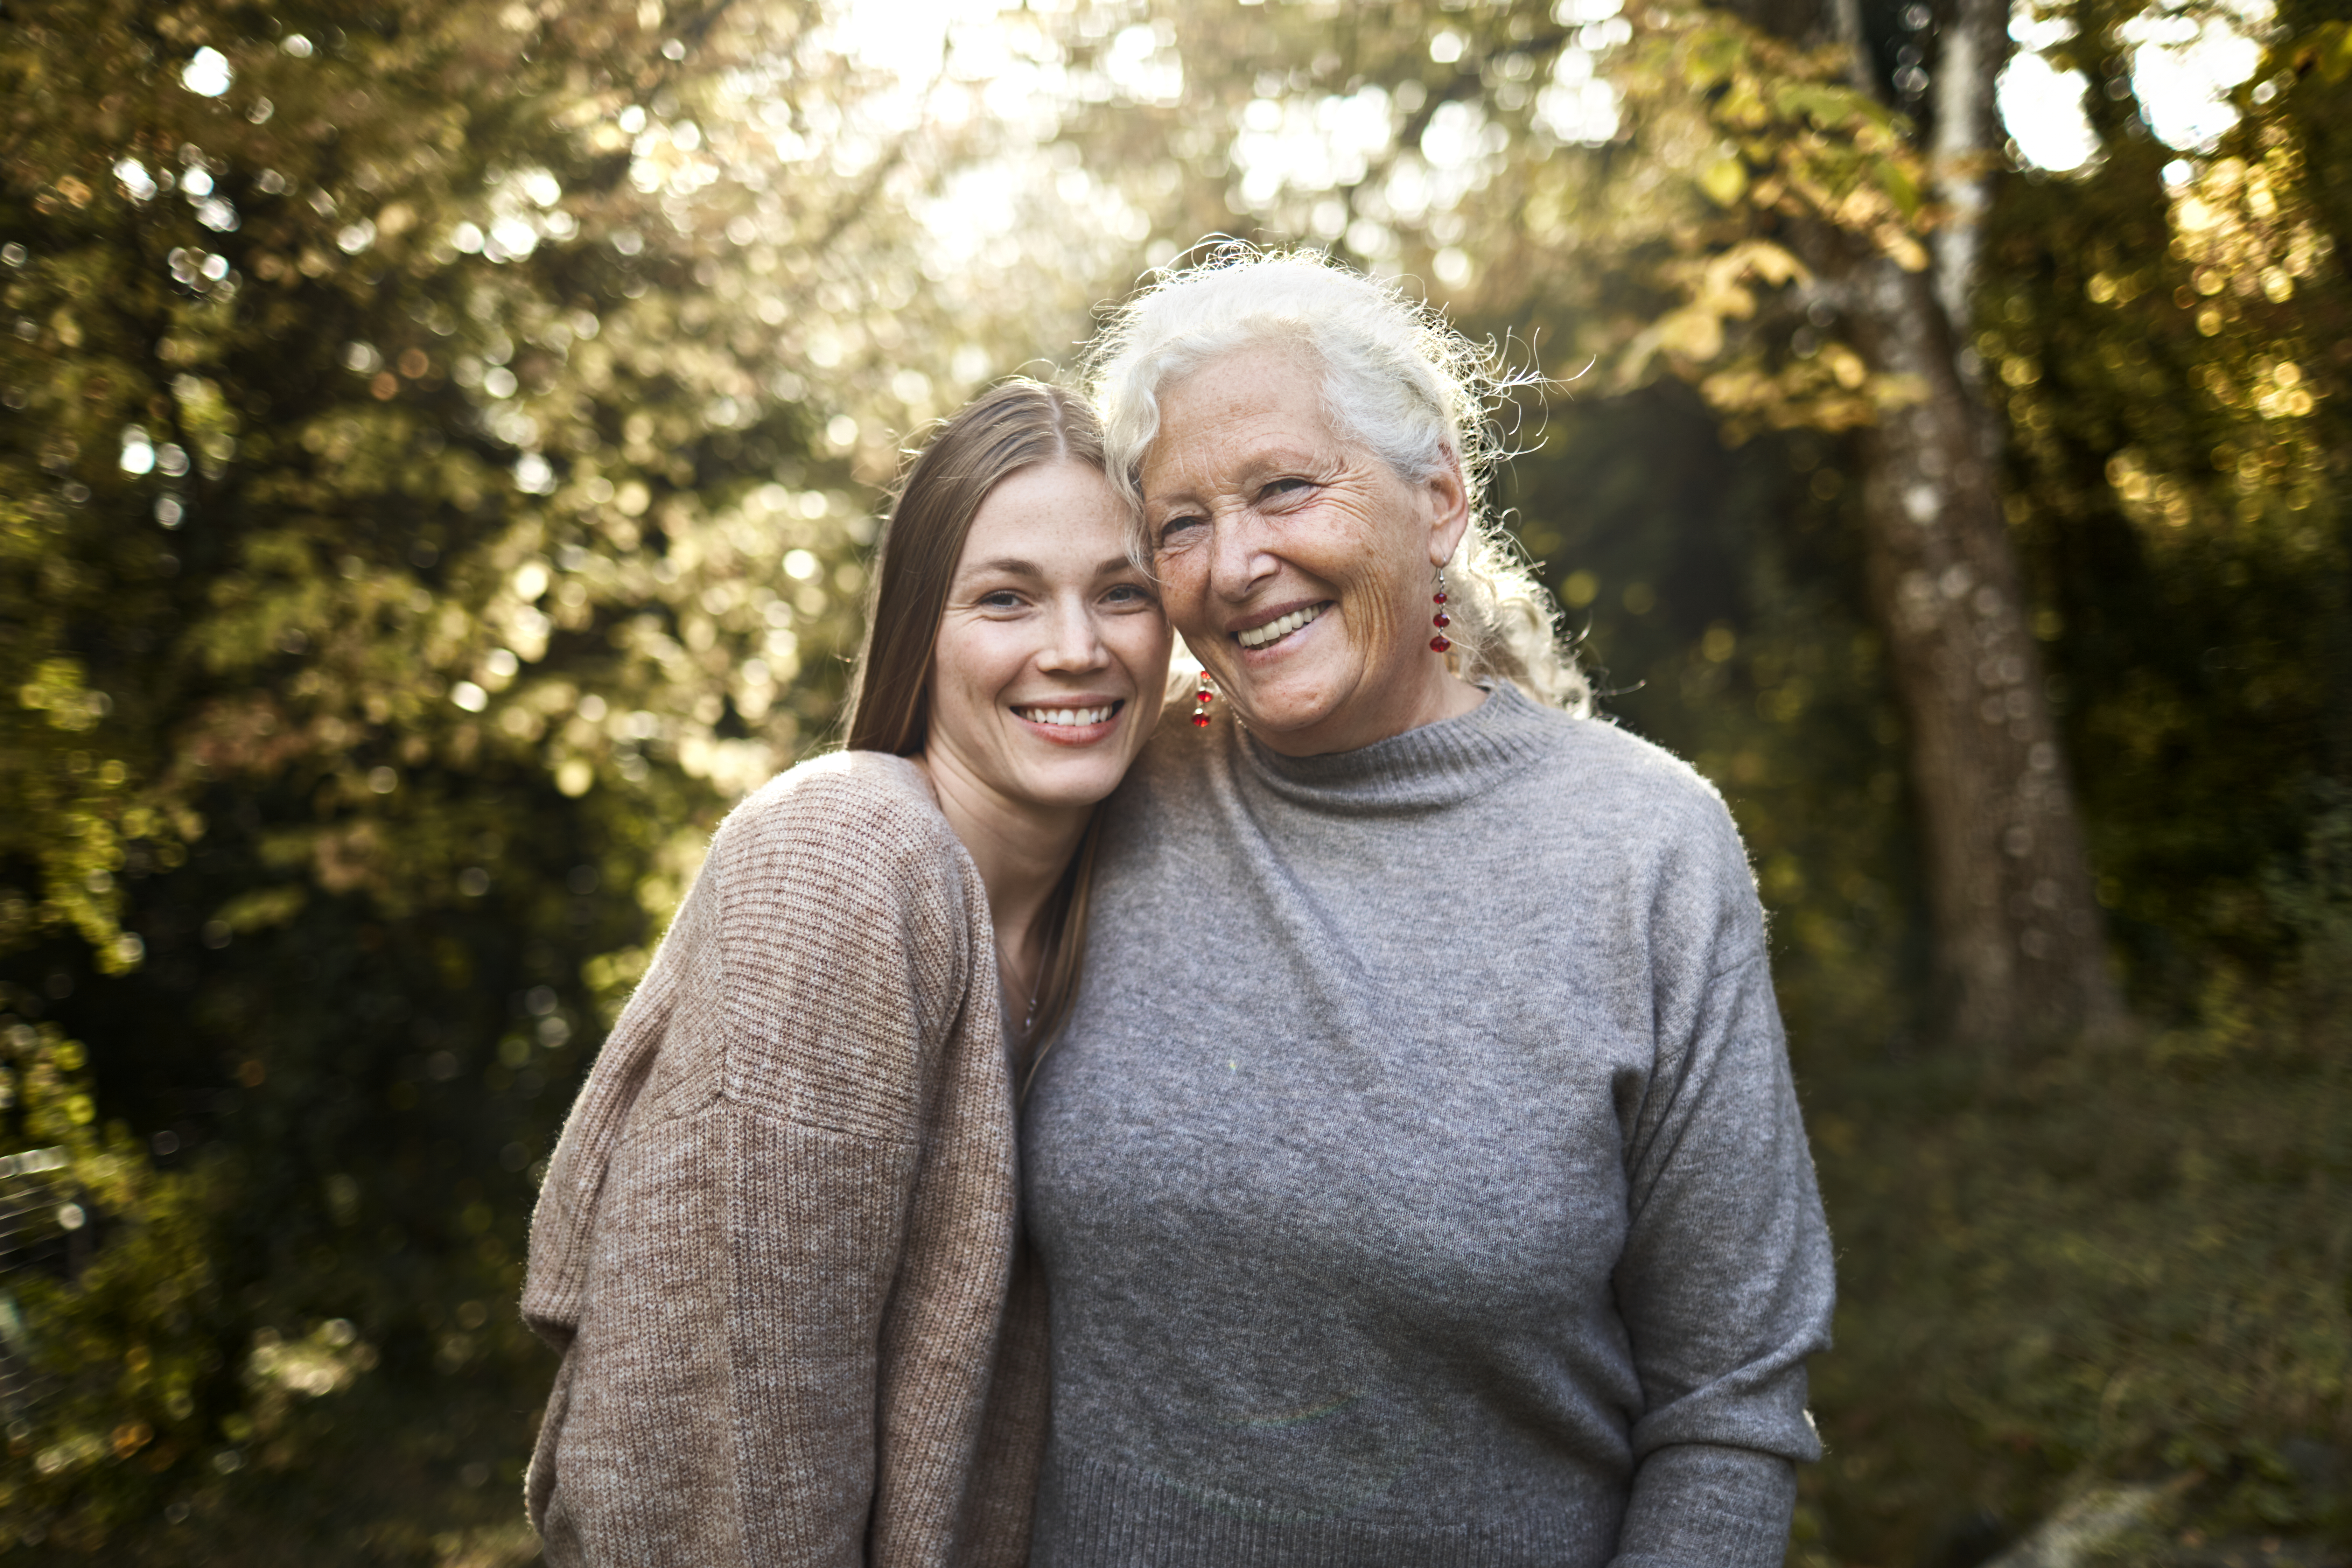 Portrait of happy grandmother and adult granddaughter in garden | Source: Getty Images